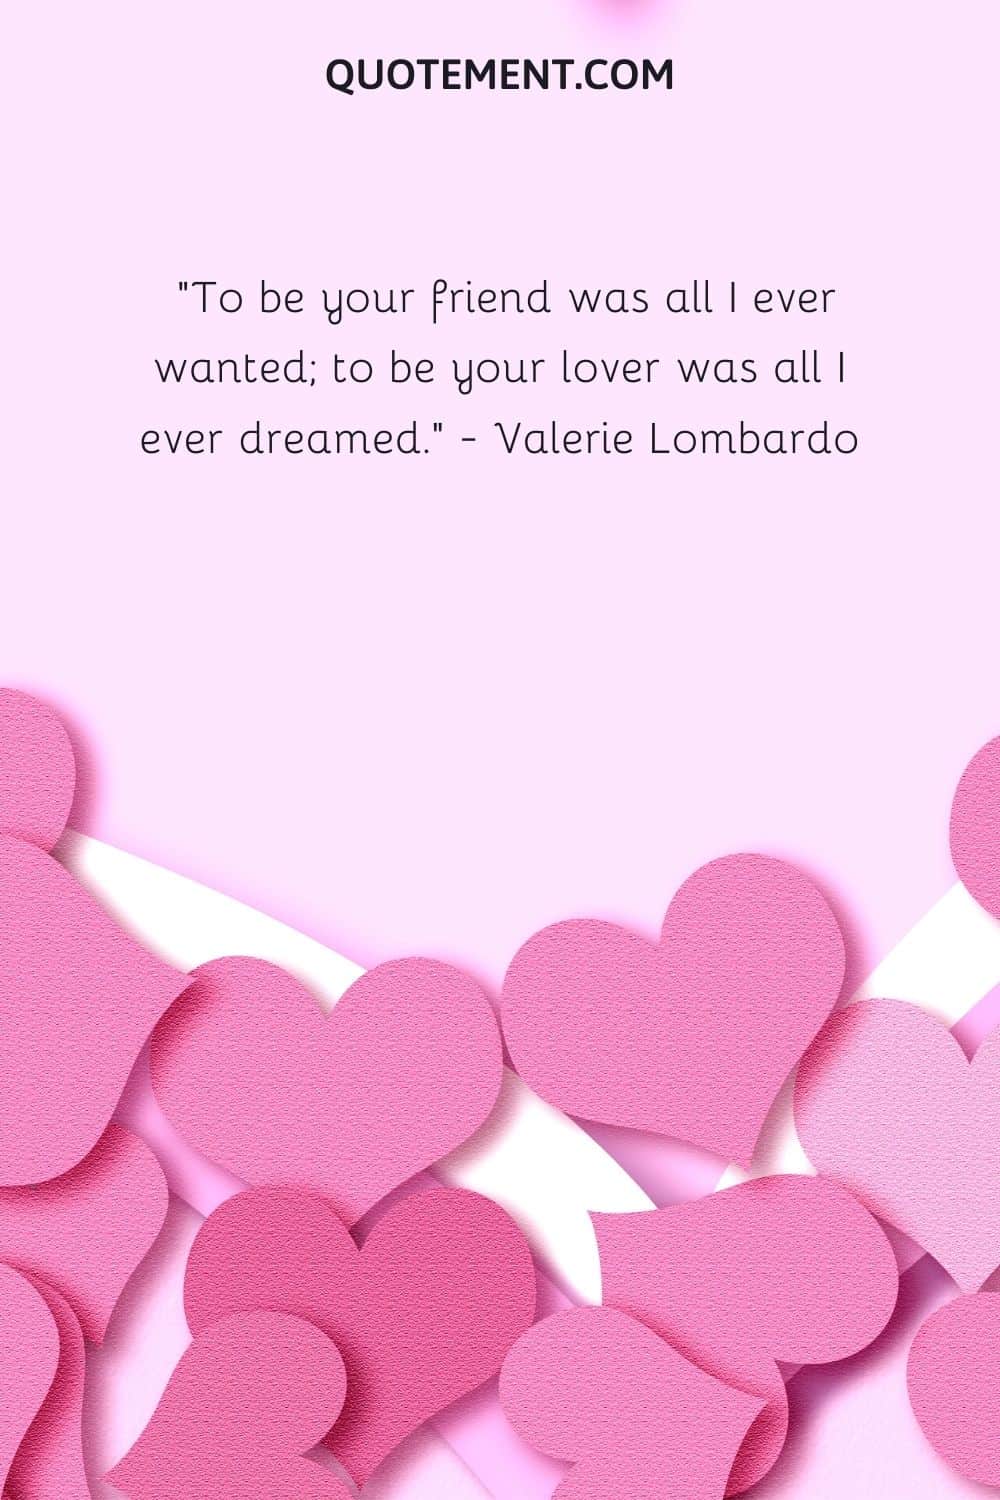 To be your friend was all I ever wanted; to be your lover was all I ever dreamed. — Valerie Lombardo